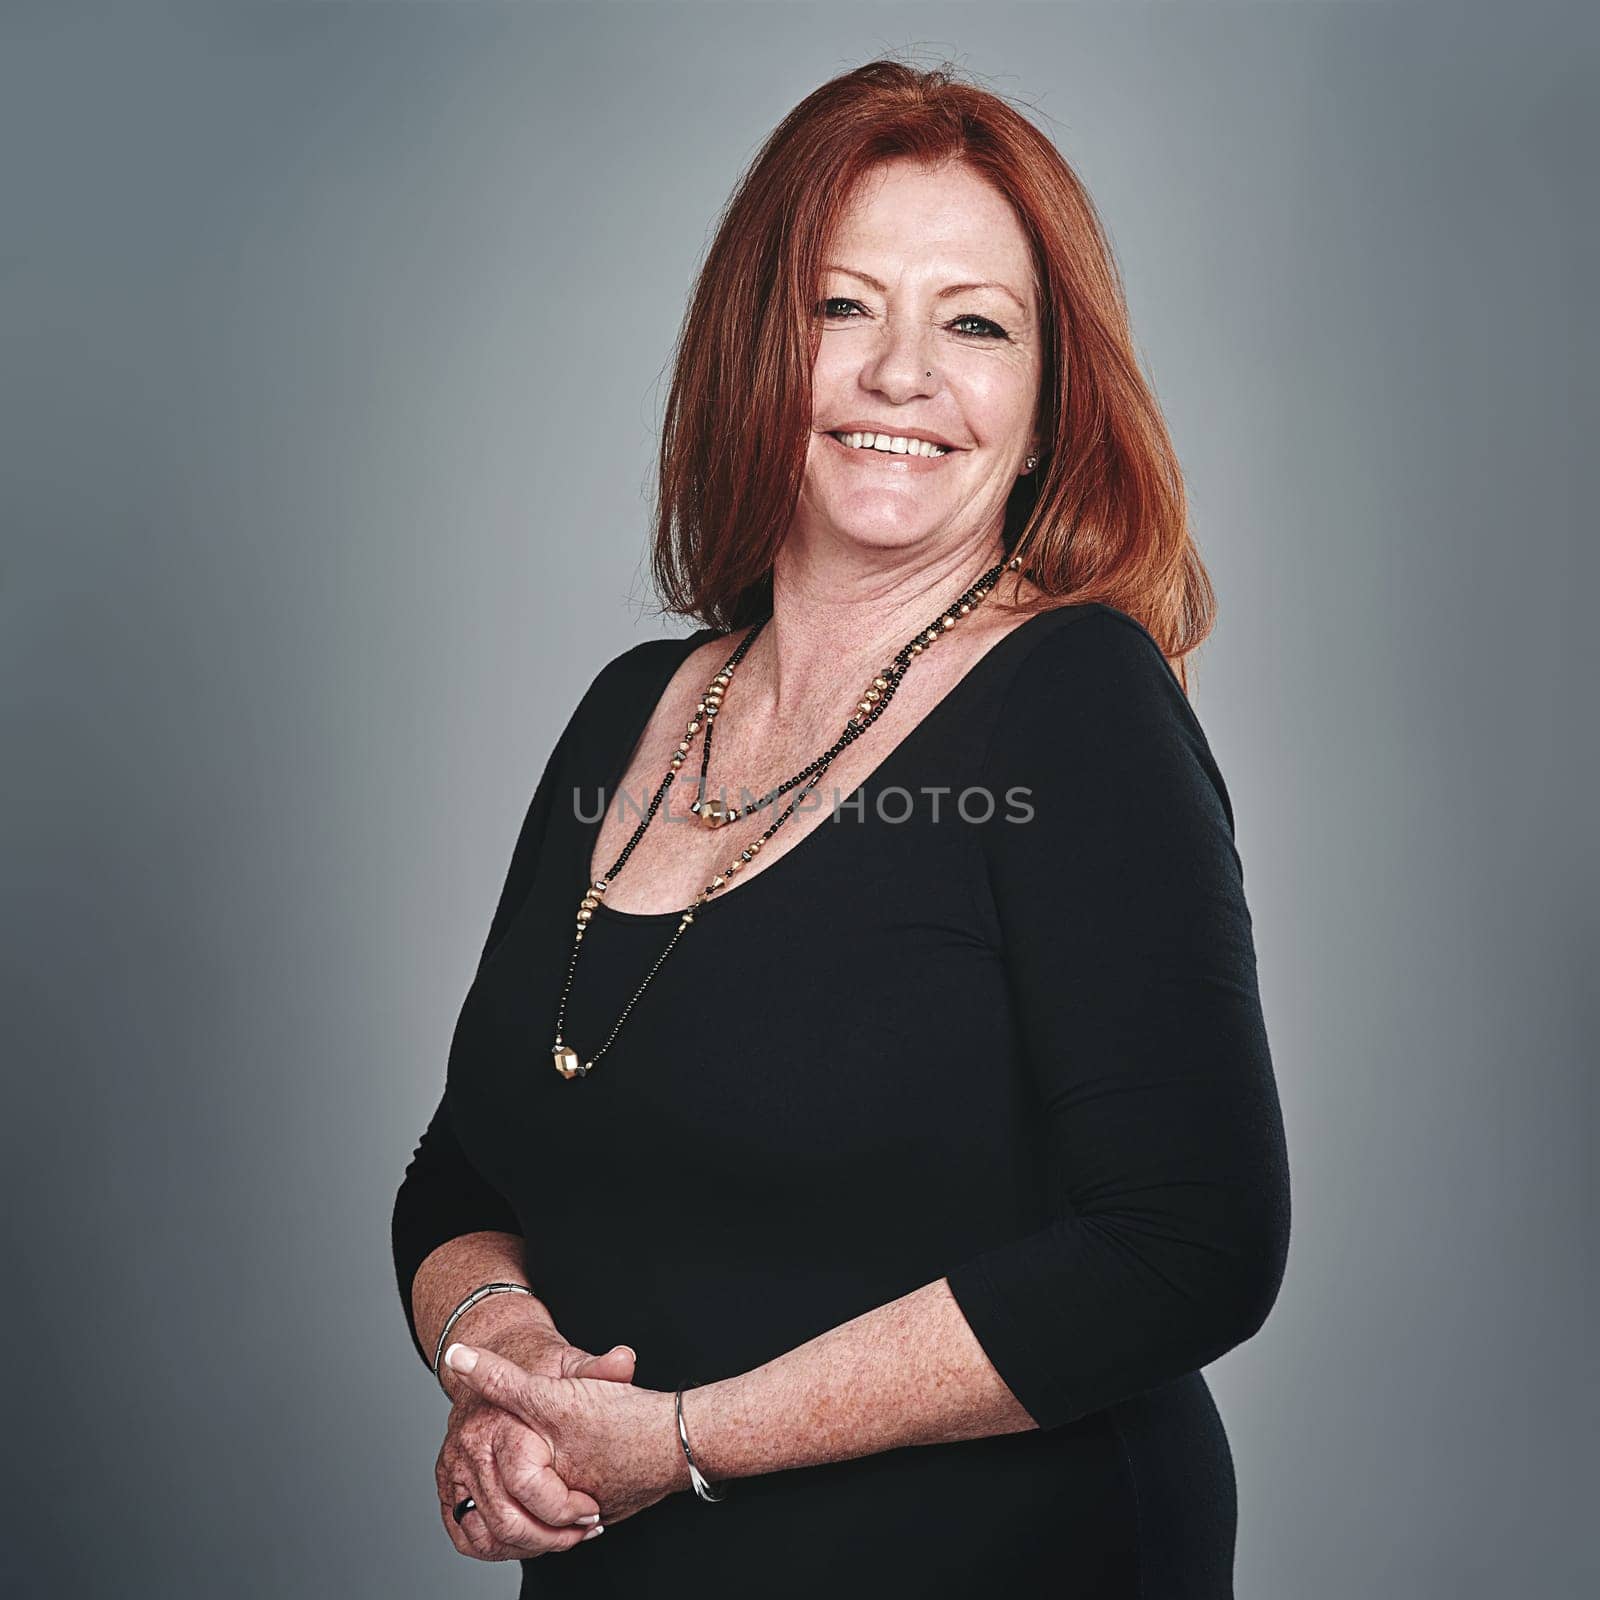 Passionate about personal and professional improvement. Studio portrait of a happy mature businesswoman posing against a grey background